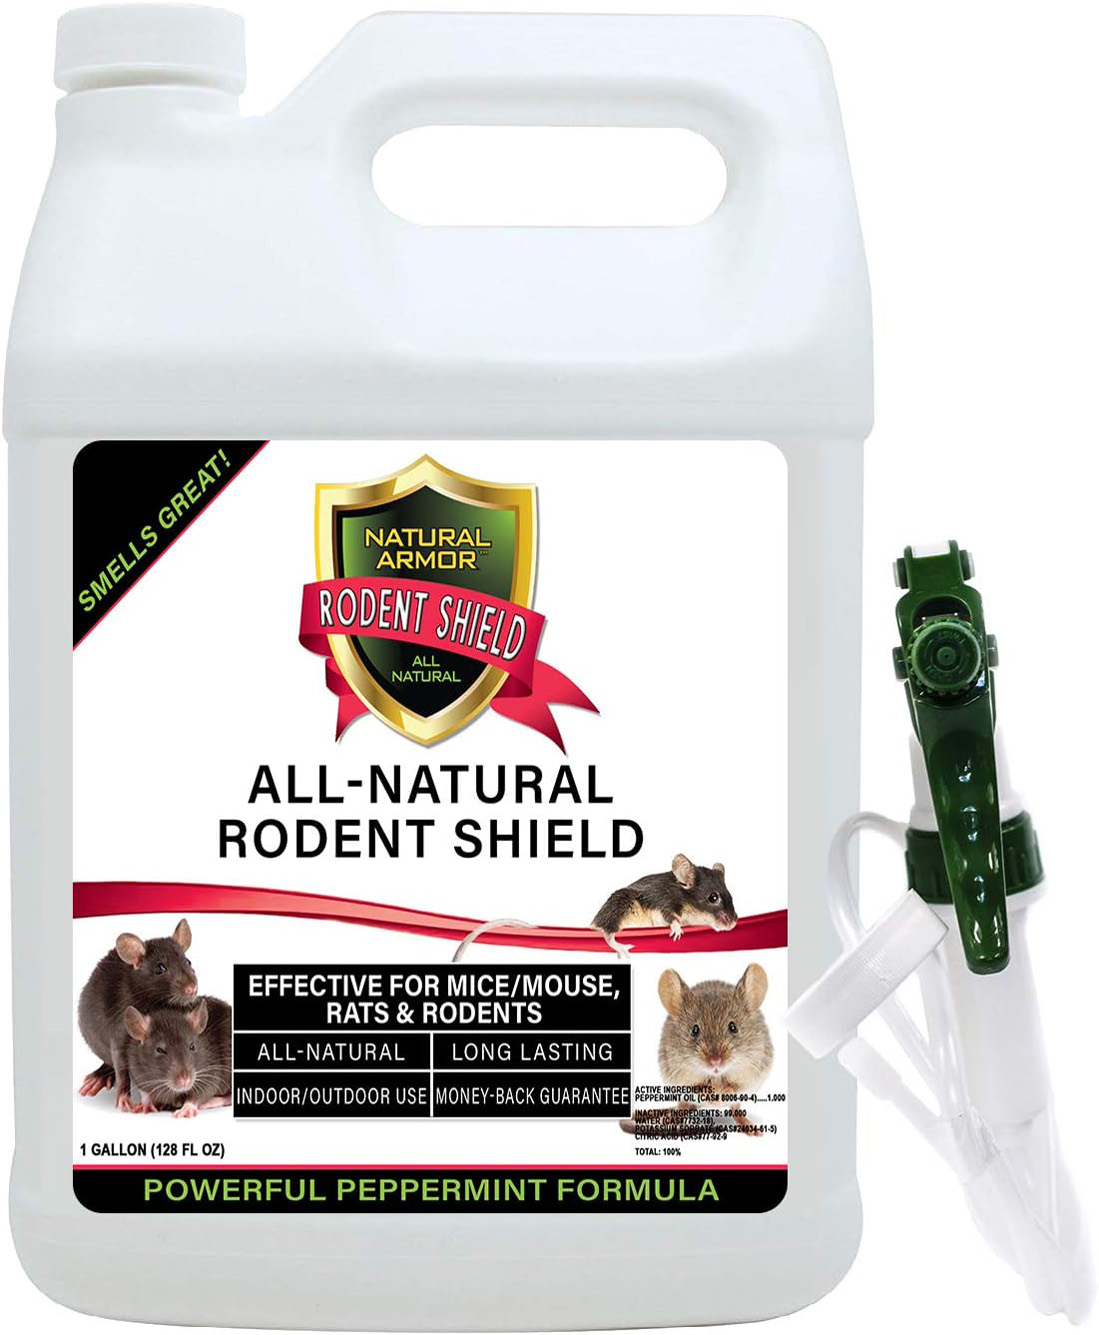 Natural Armor Peppermint Repellent for MiceMouse, Rats